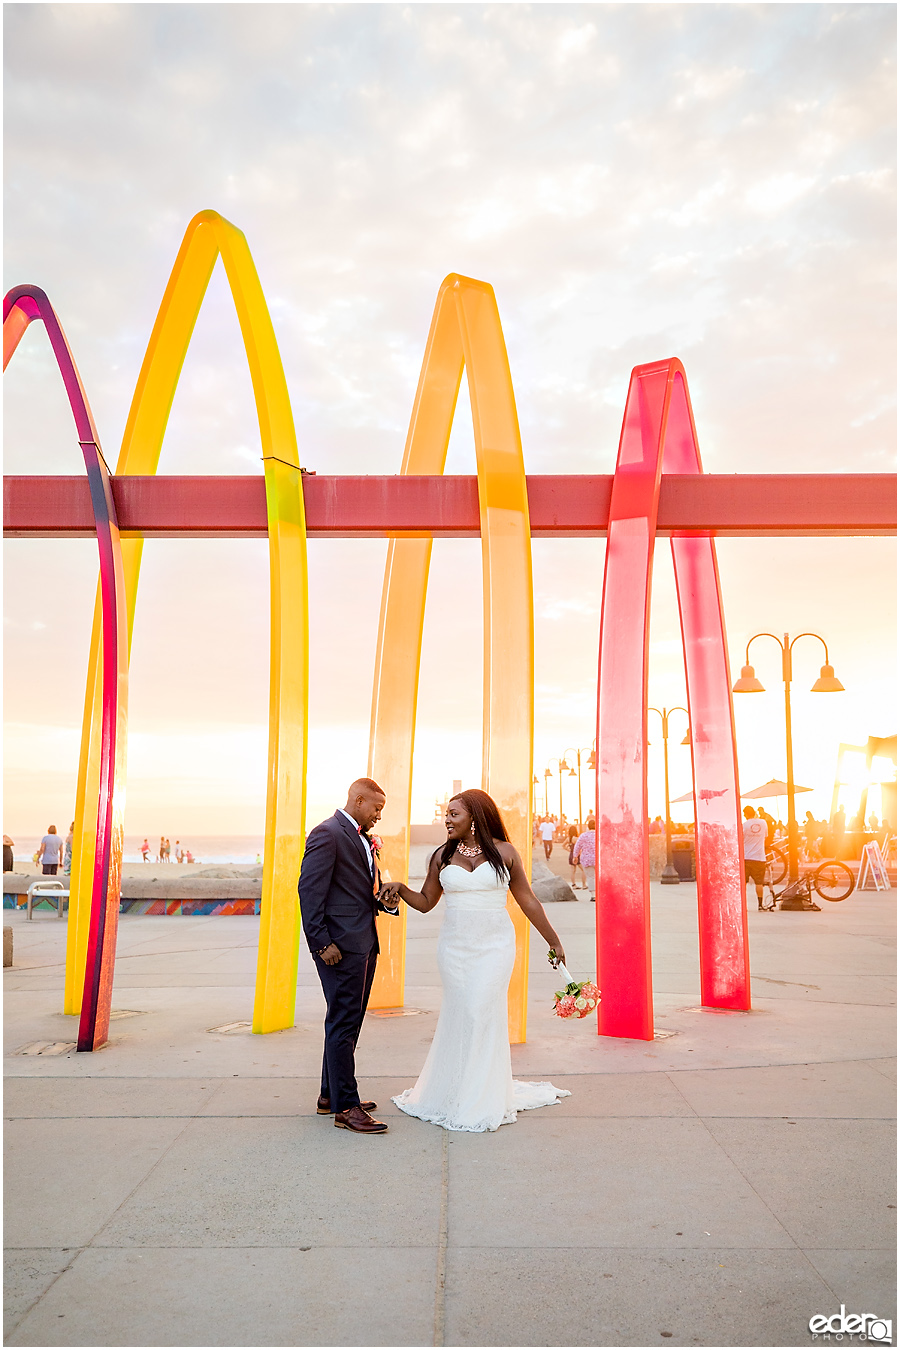 Sunset wedding portraits in Imperial Beach.